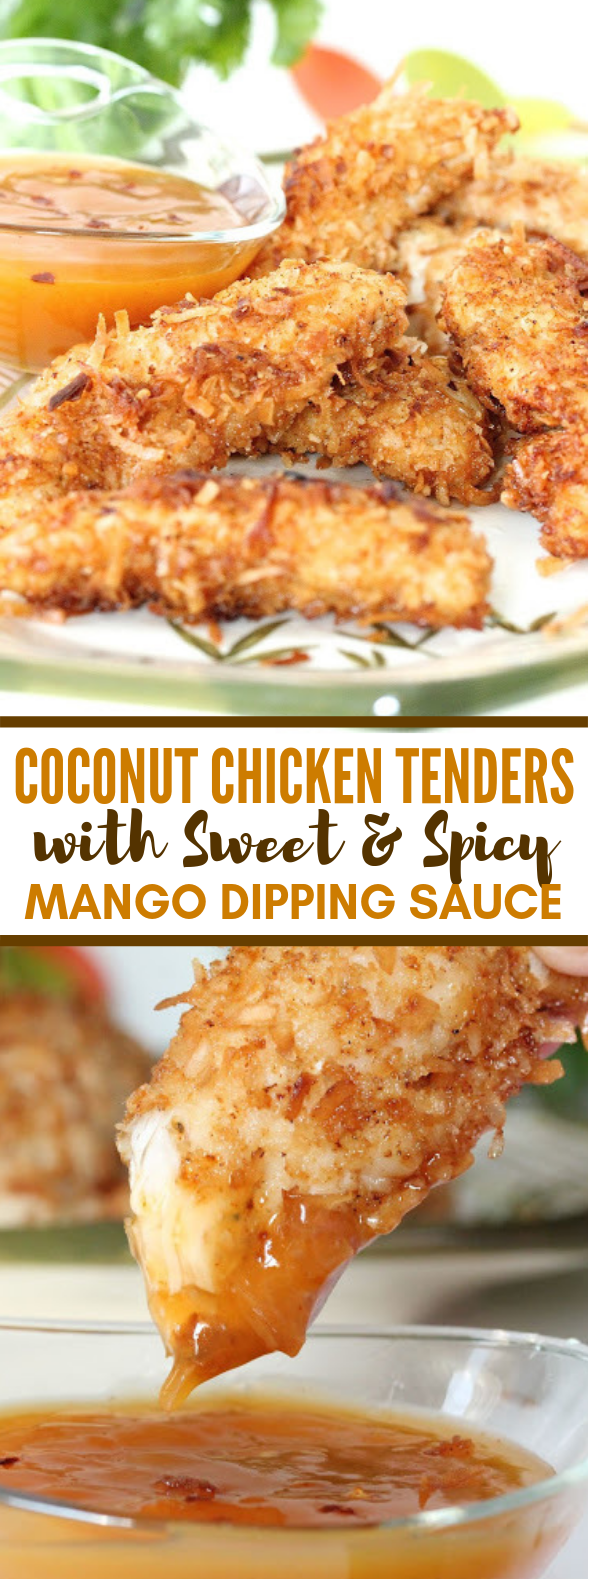 COCONUT CHICKEN TENDERS WITH SWEET AND SPICY MANGO DIPPING SAUCE #dinner #delicious